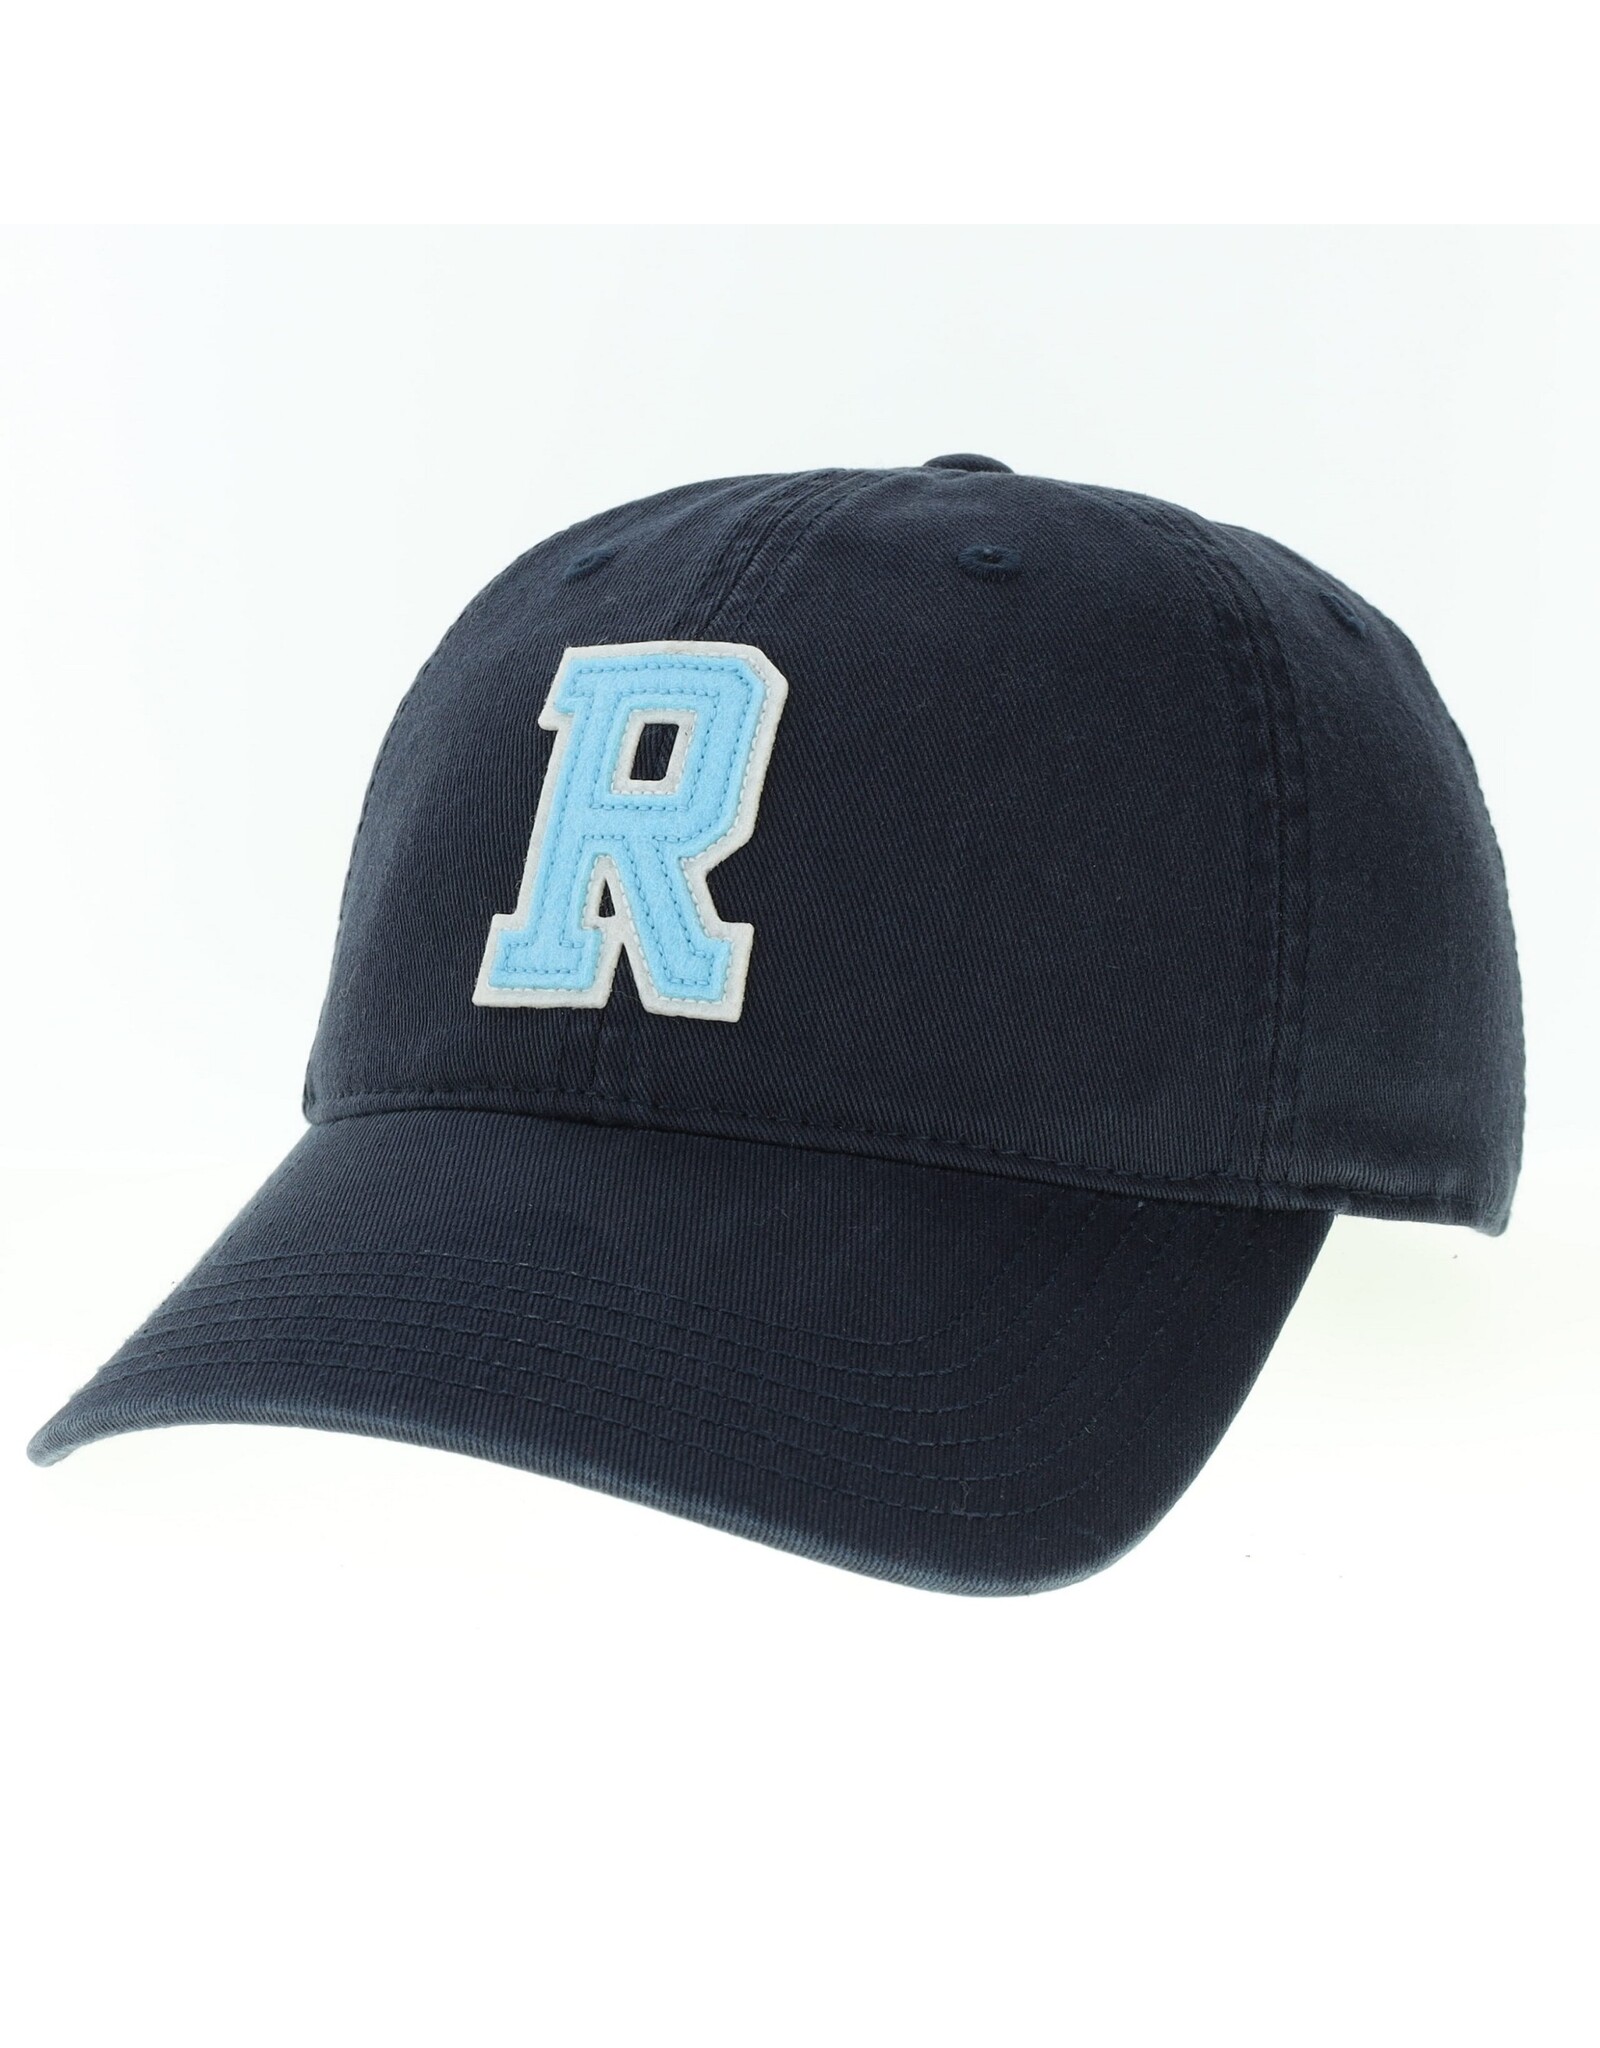 LEGACY ATHLETICS LEGACY RELAXED TWILL HAT NAVY/BLUE R